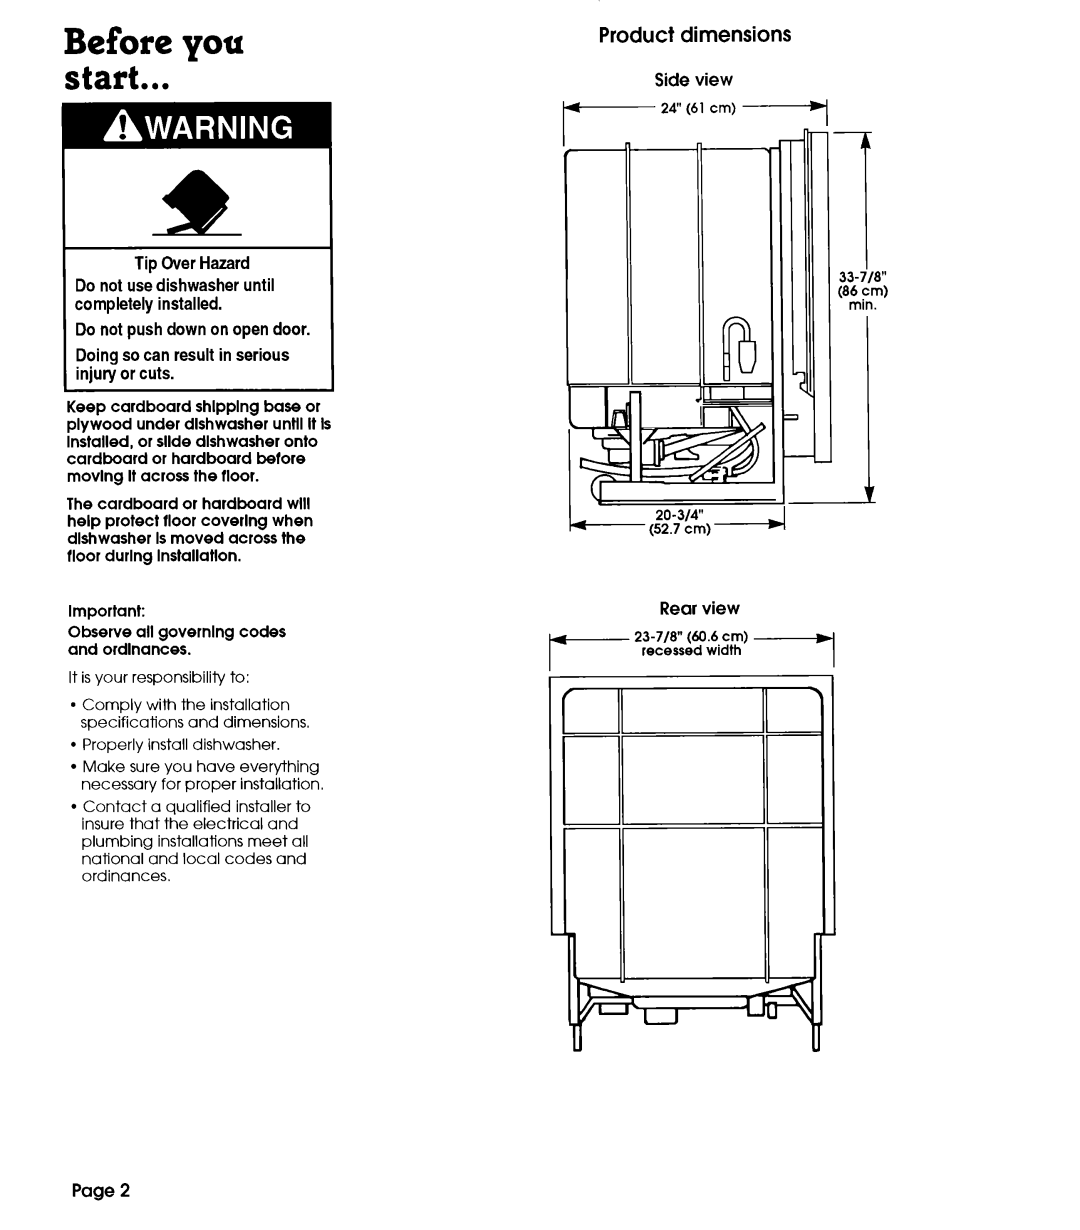 Whirlpool 801 installation instructions Before you start, Product, Side view, Rear view, Page, dimensions 